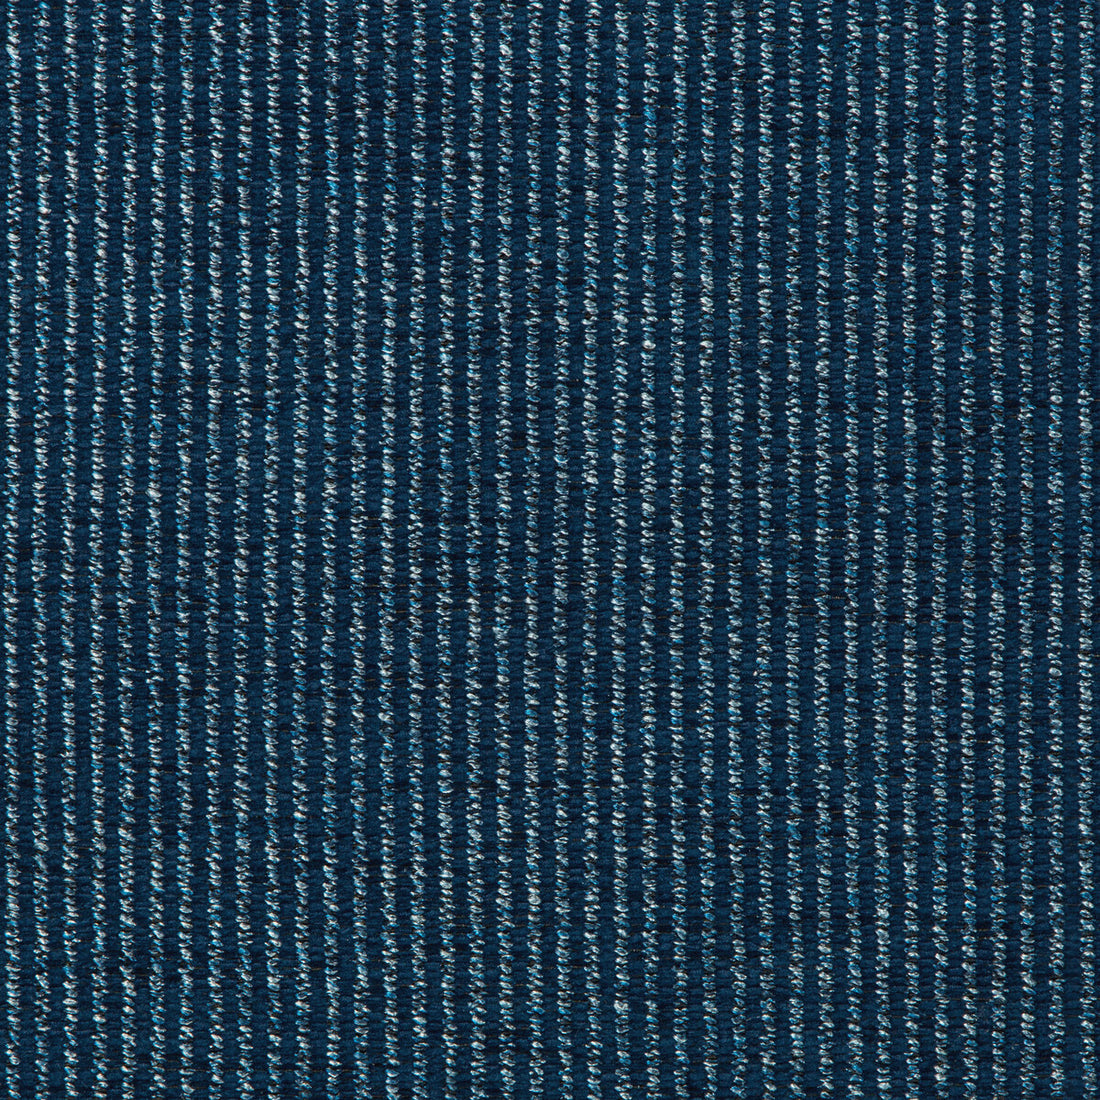 Kravet Design fabric in 36092-50 color - pattern 36092.50.0 - by Kravet Design in the Inside Out Performance Fabrics collection